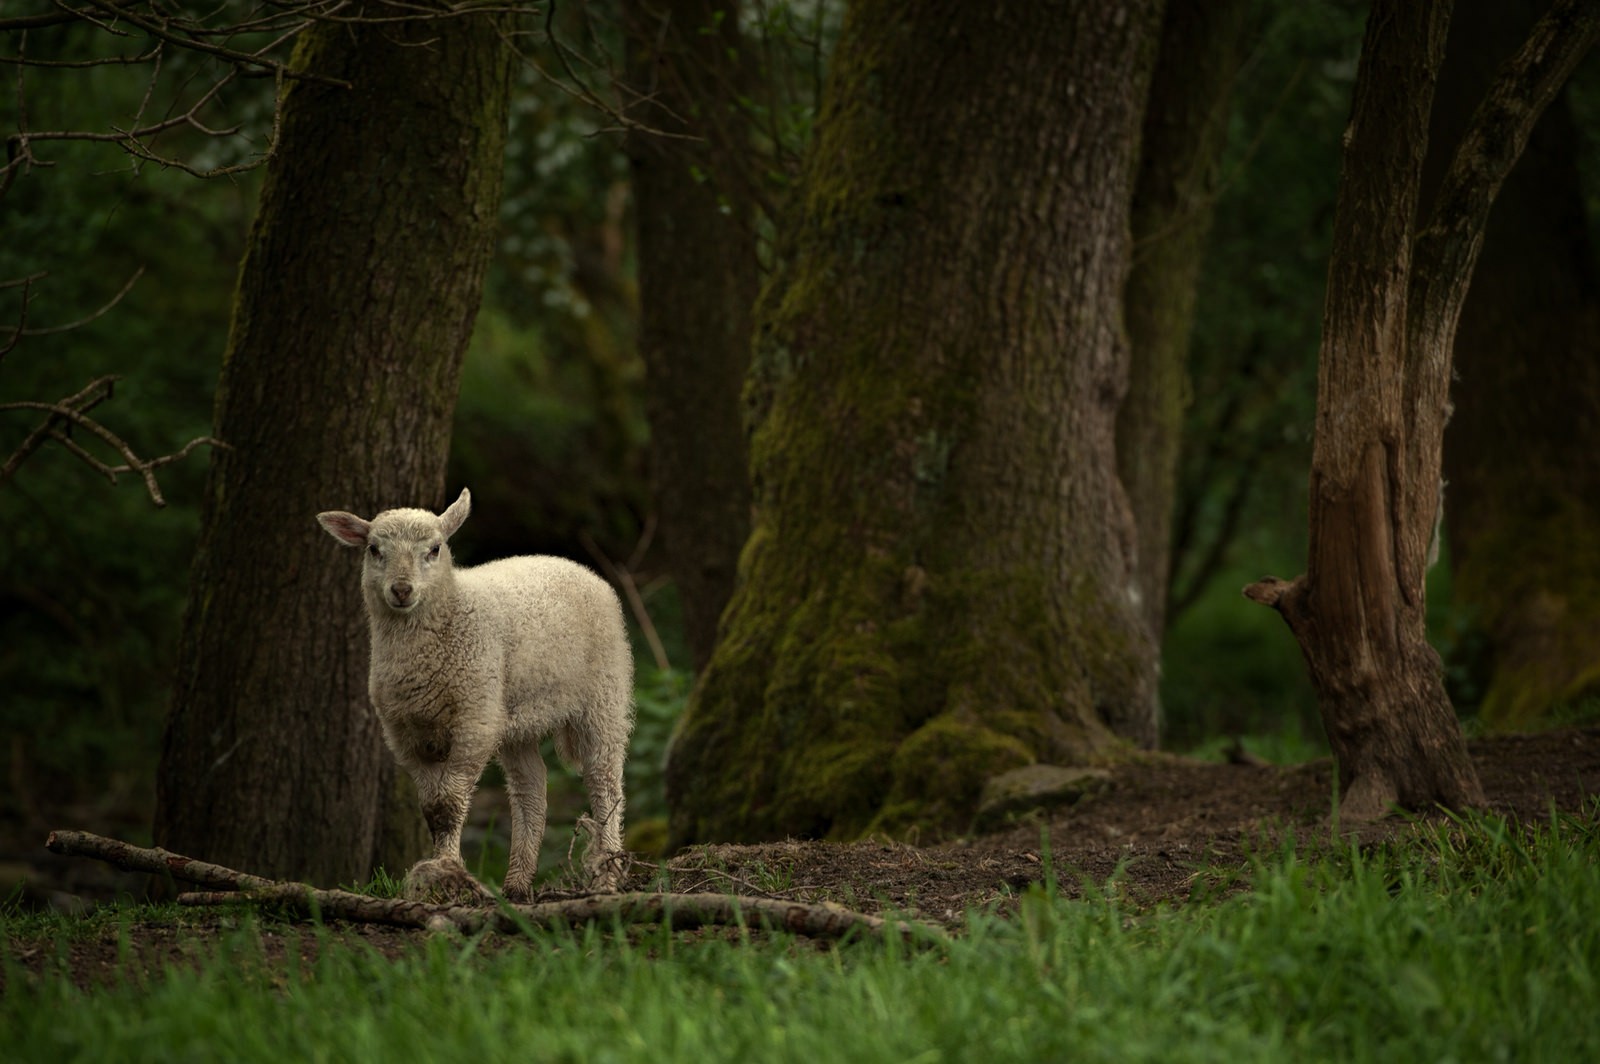 looking at viewer, Photography, Nature, Trees, Sheep, Grass, Plants, Moss, Forest, Branch, Lamb, Baby animals Wallpaper